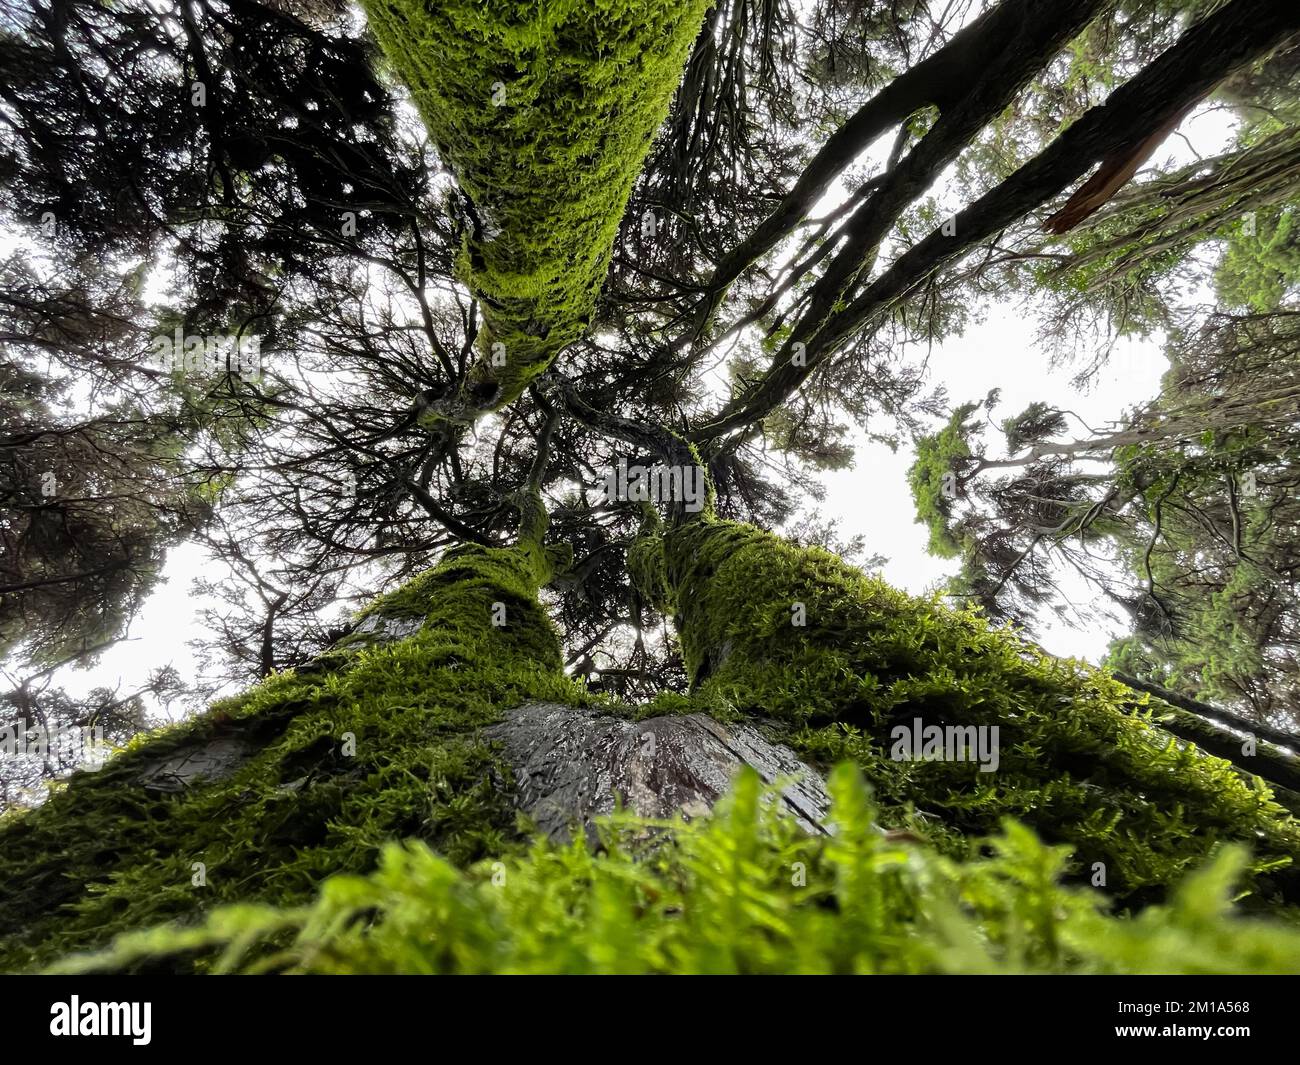 Bottom view of tall old trees in a forest Stock Photo